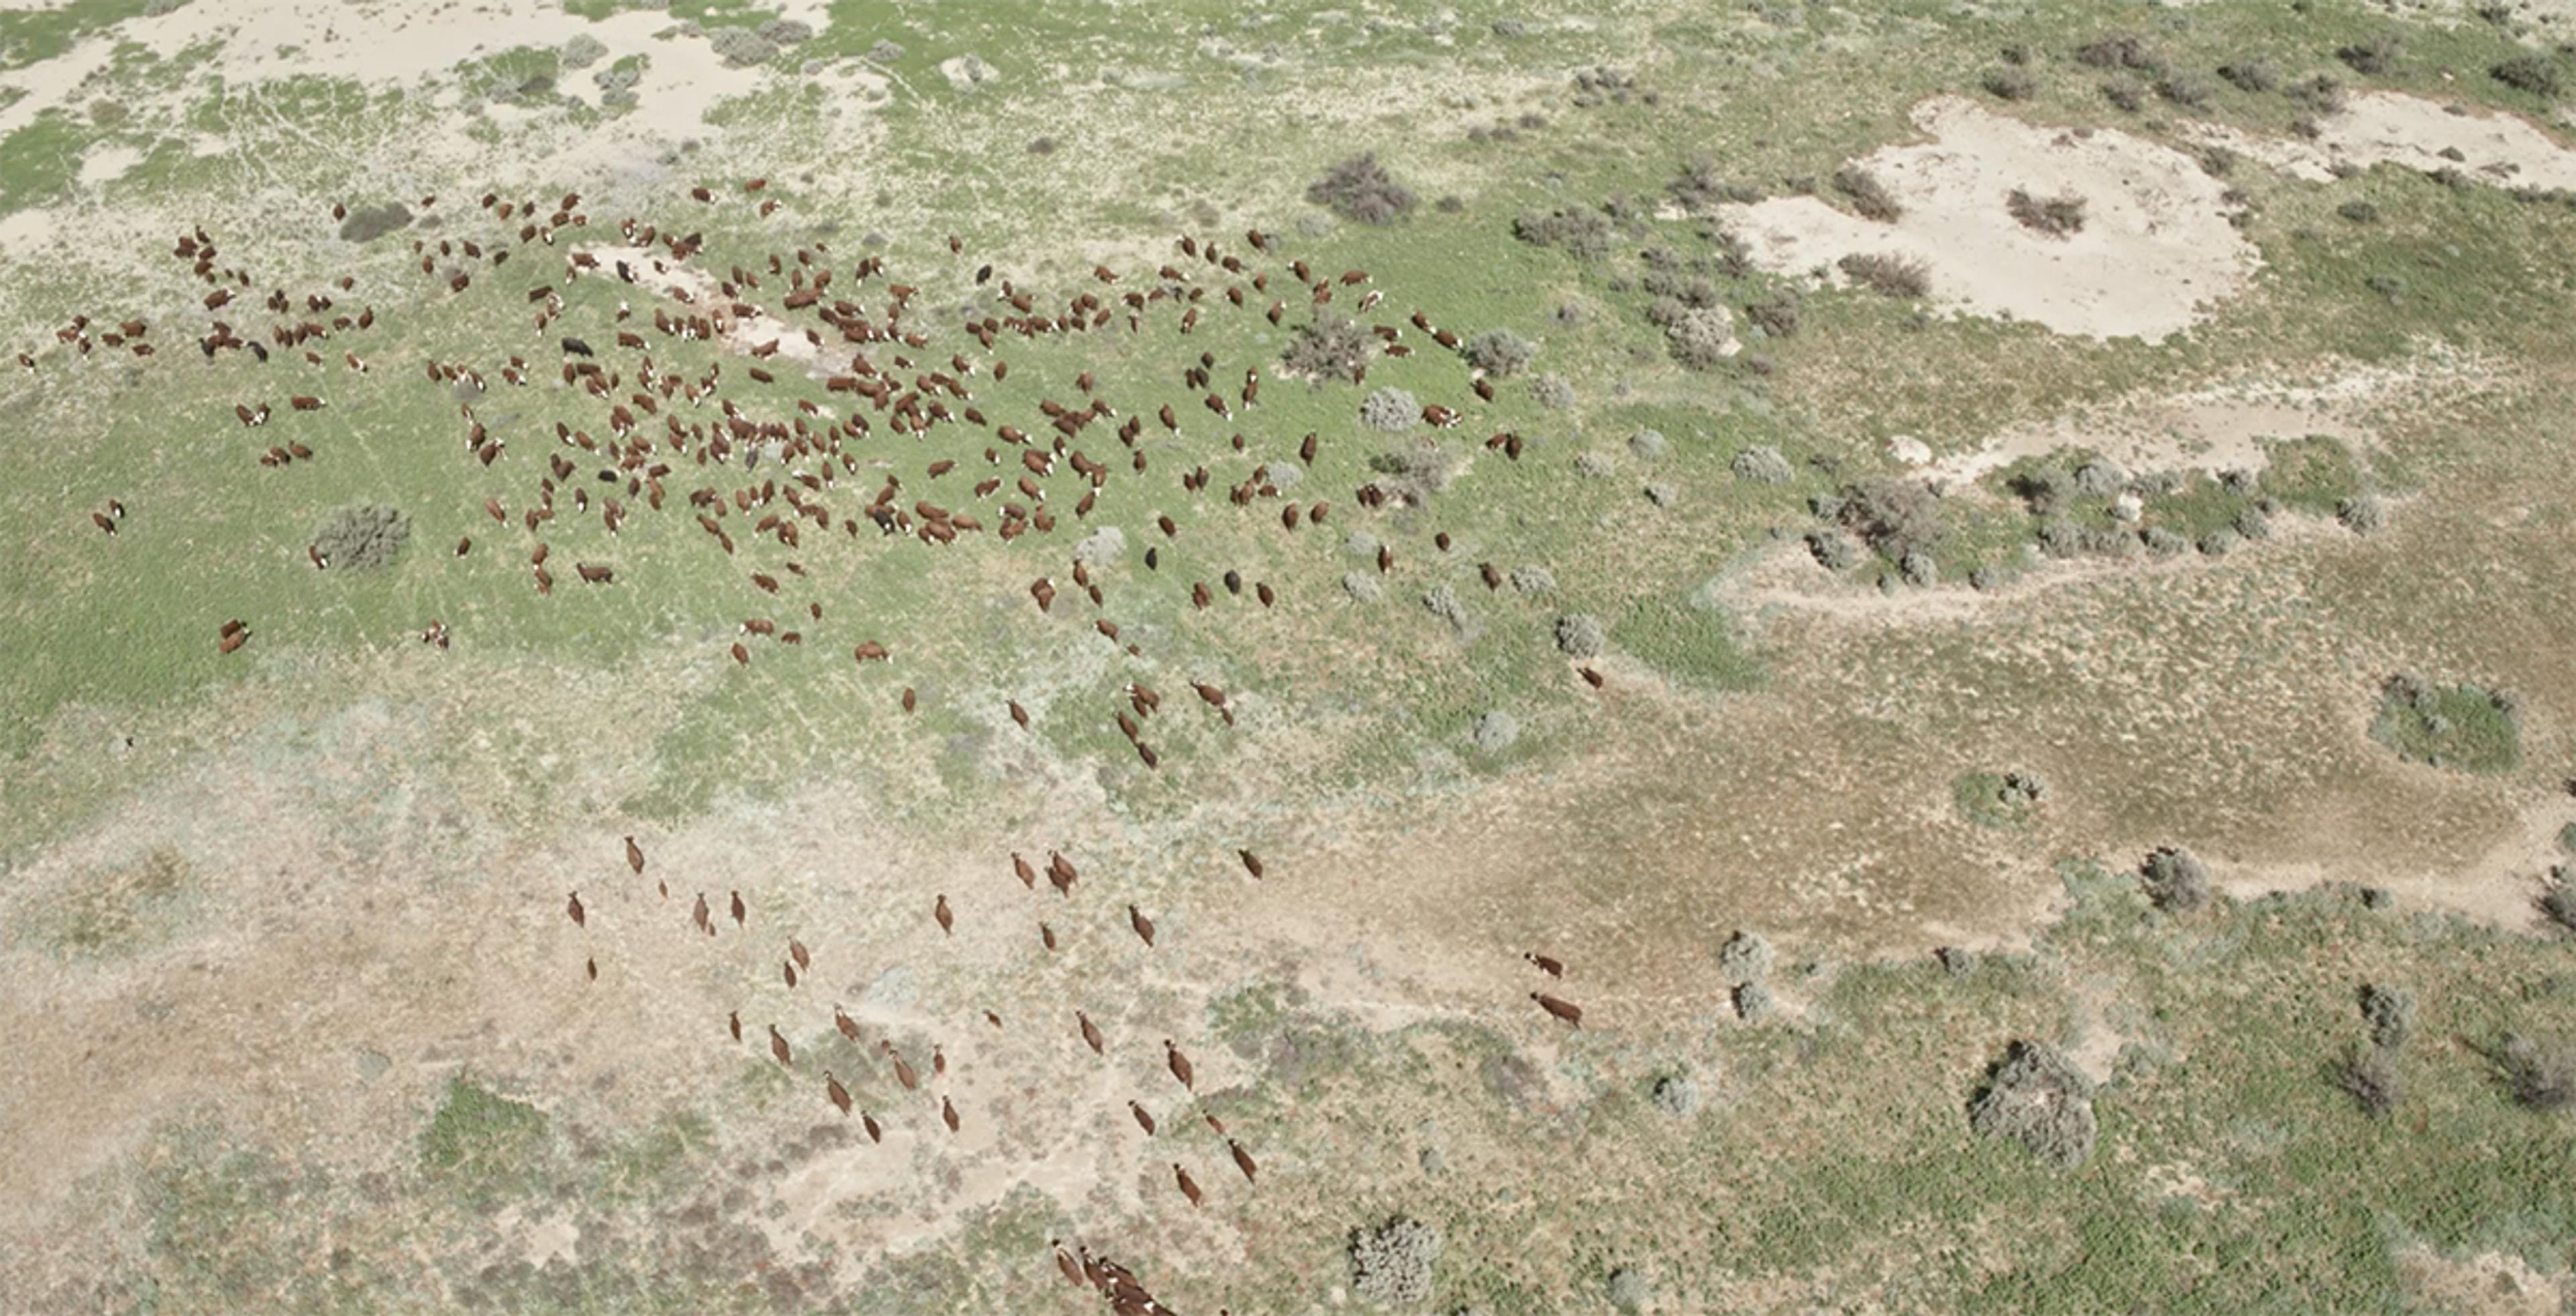 In an aerial view, a herd of cattle look tiny against the wide expanse of land.